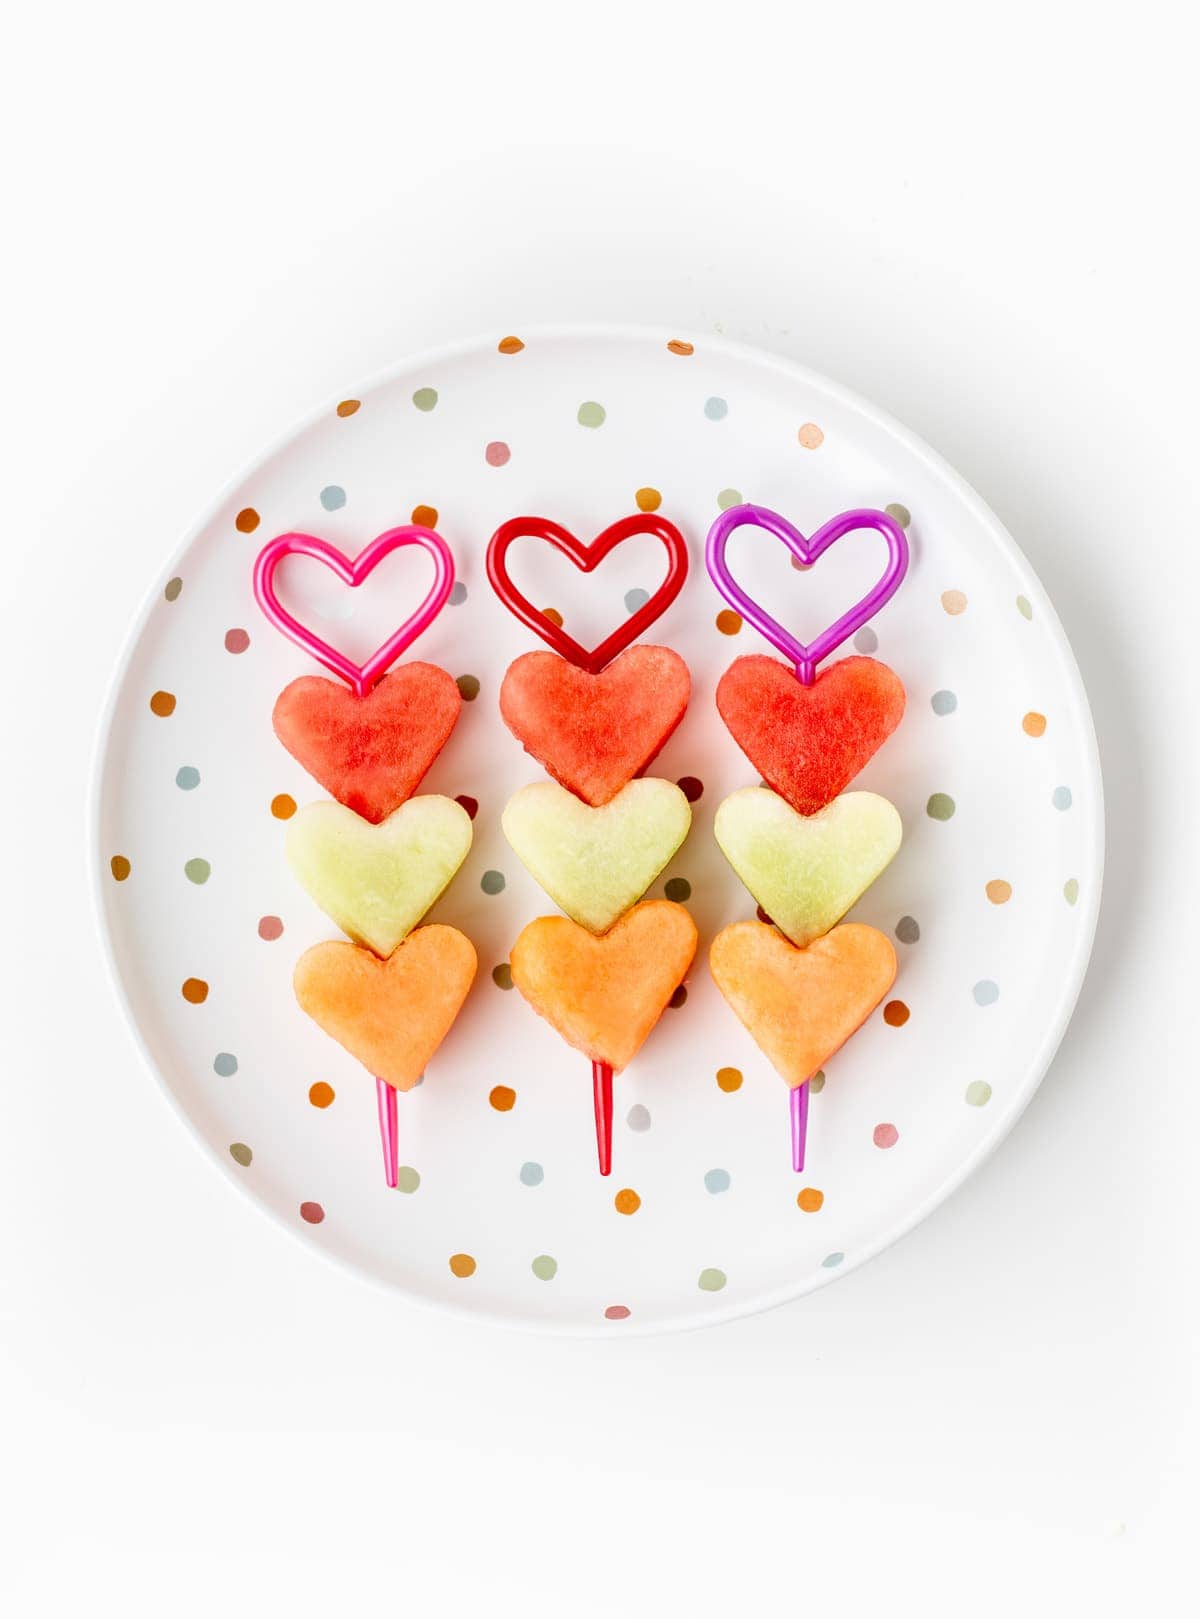 Heart-shaped watermelon, honeydew, and cantaloupe melons on heart-shaped skewers on a dotted plate.